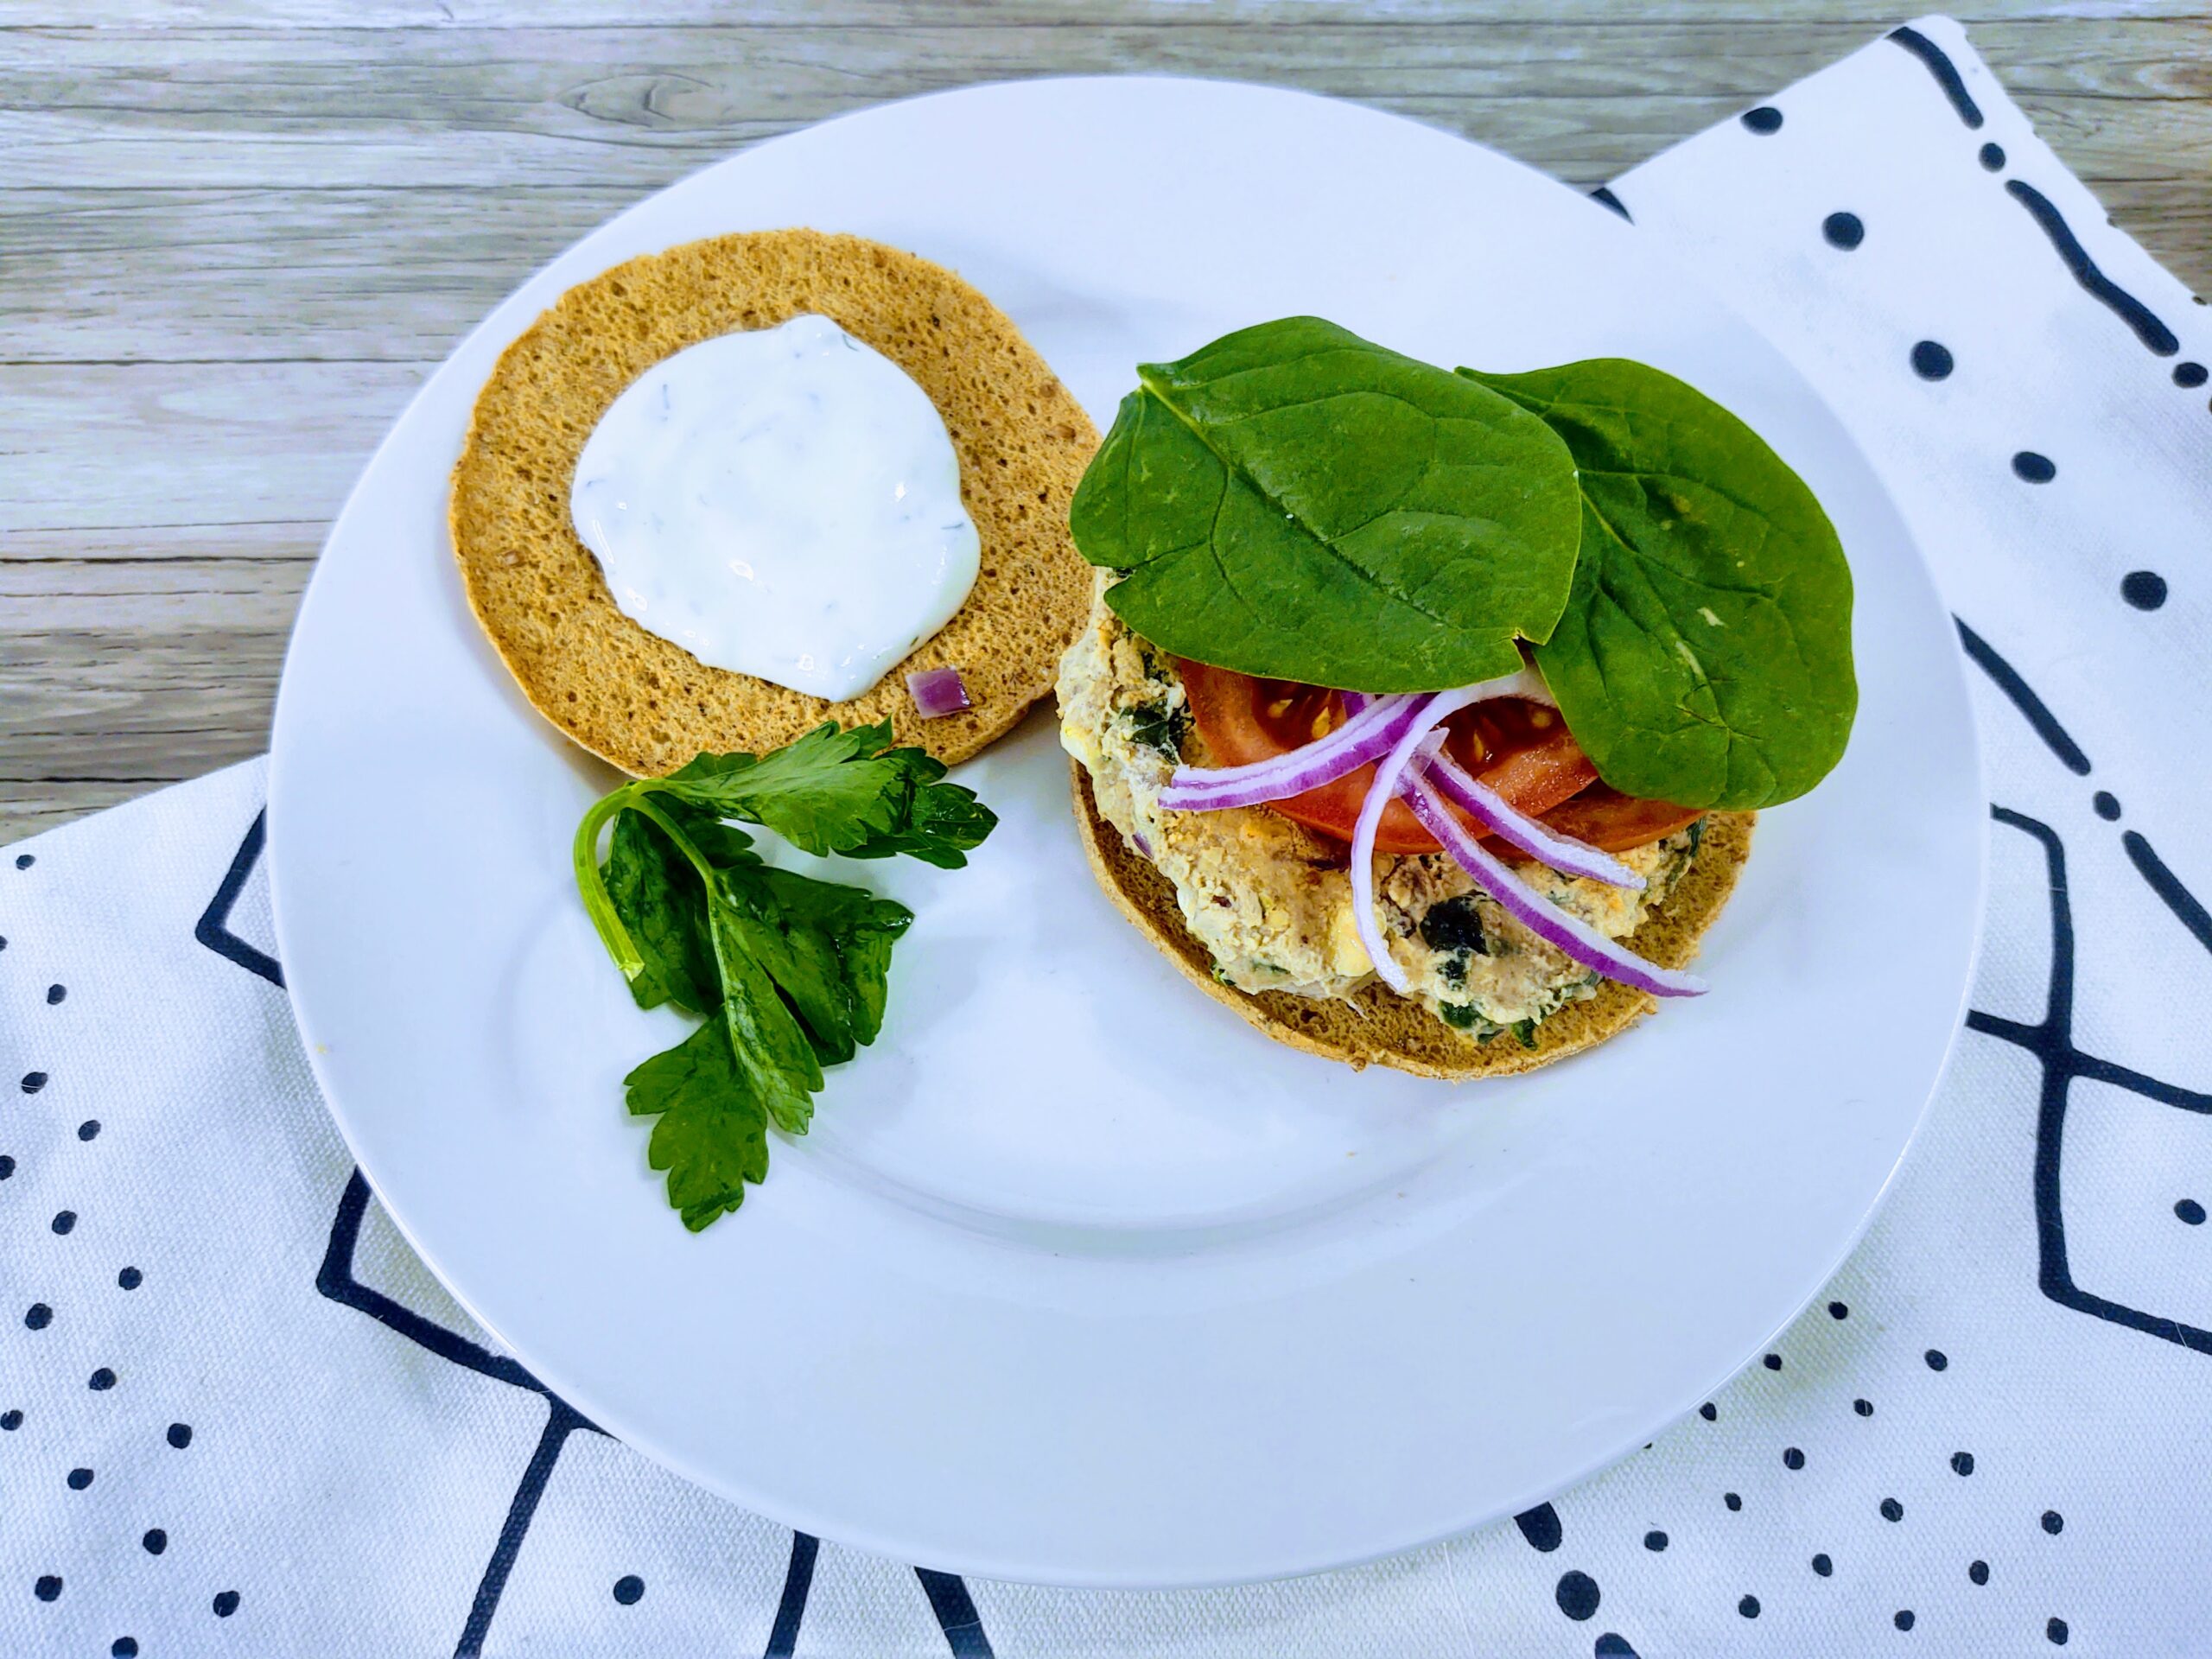 A turkey burger with spinach, tomato, onion and Taziki sauce sitting on a white plate